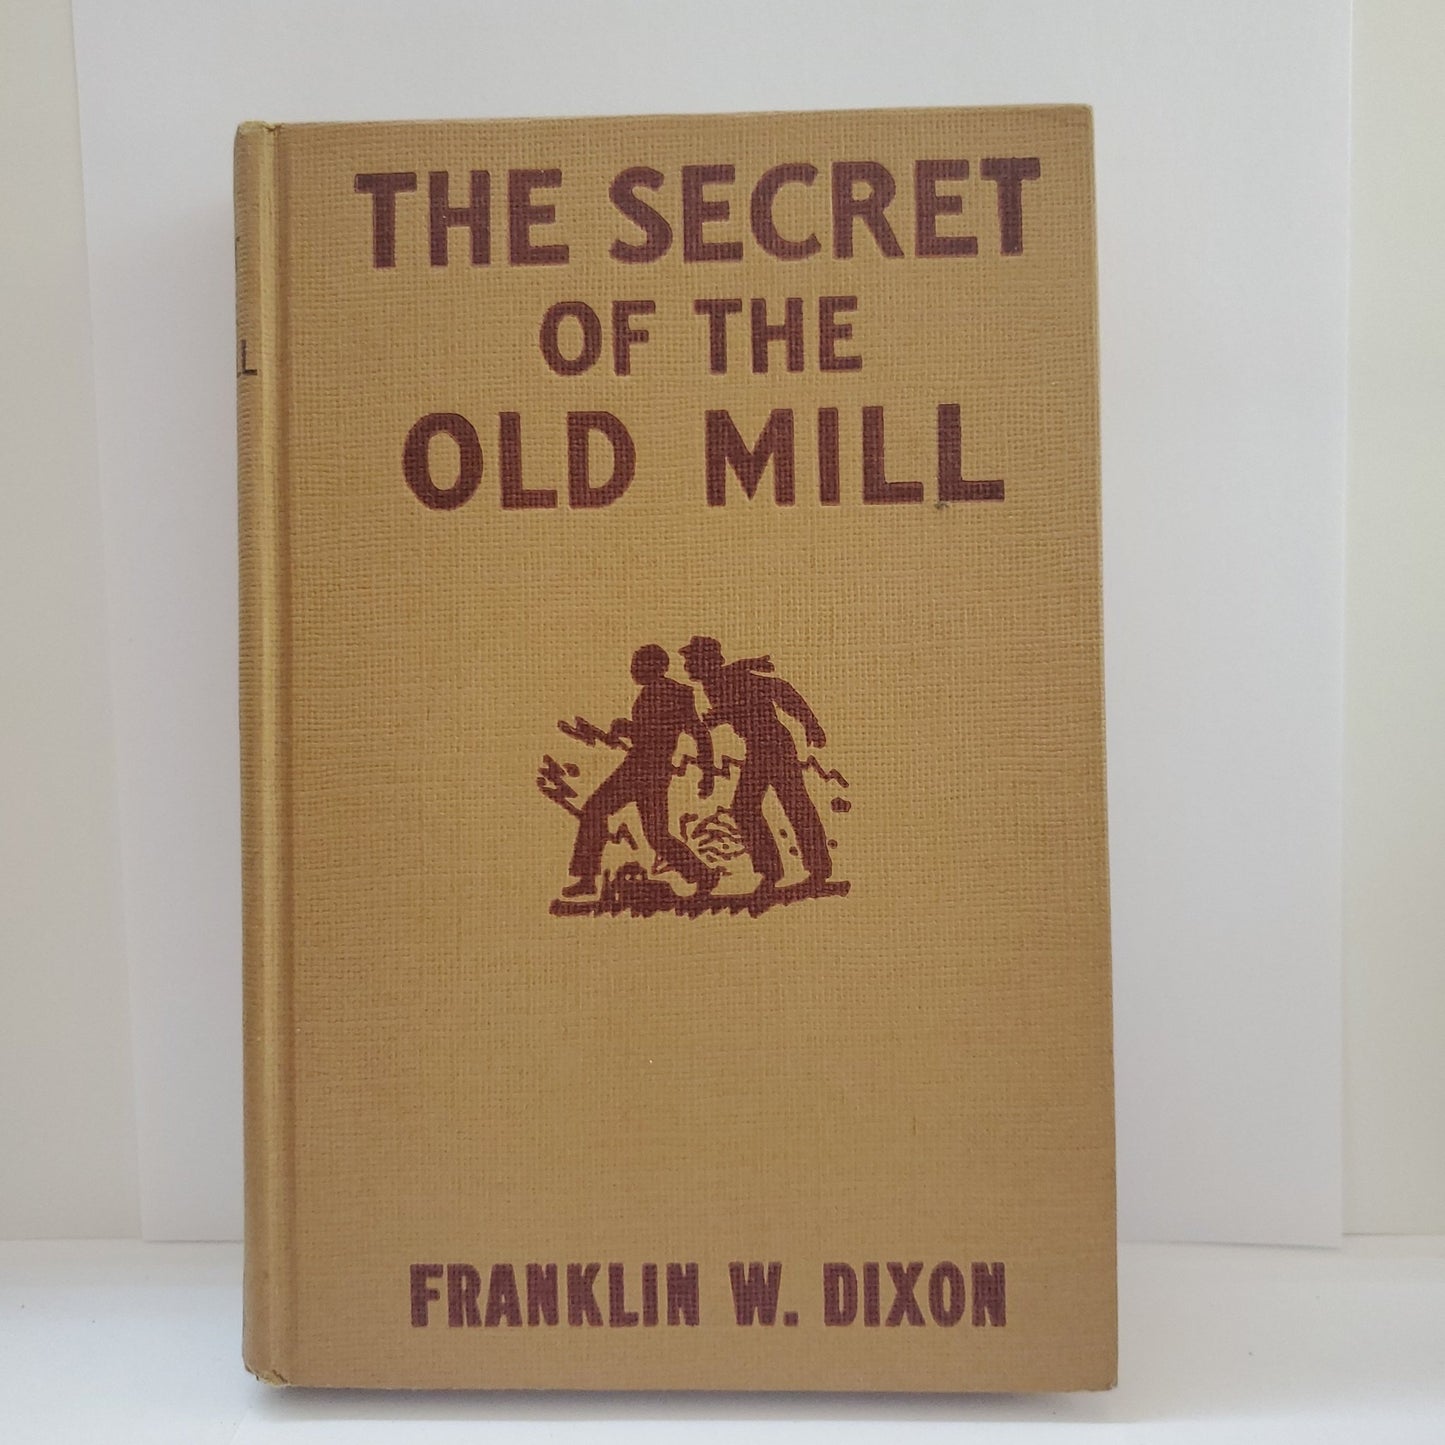 The Secret of the Old Mill - [ash-ling] Booksellers